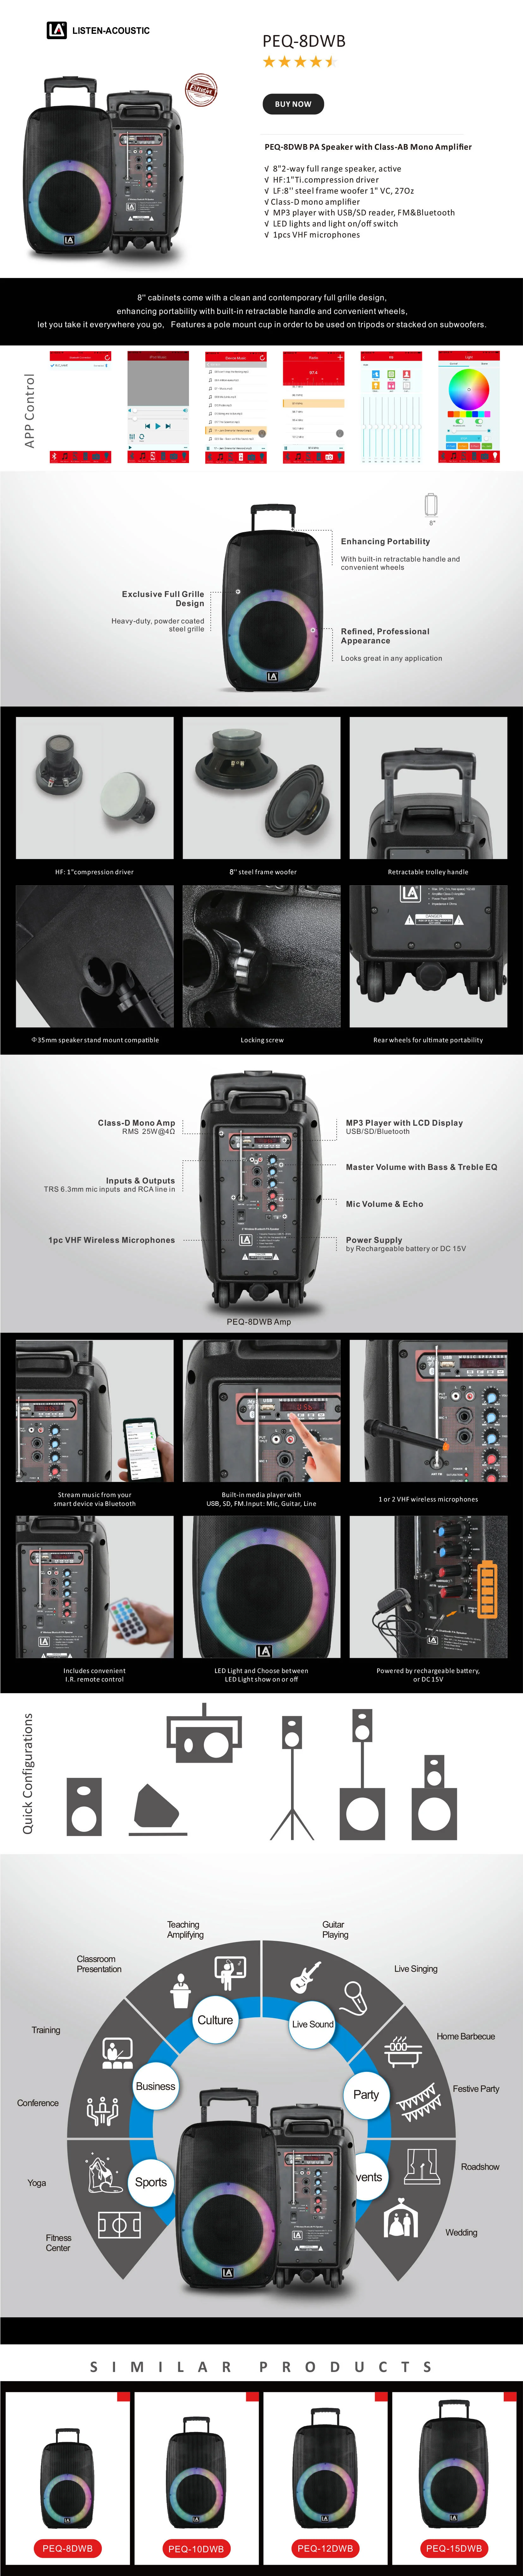 DJ speakers, portable microphone and speaker, church speakers, pa system, PEQ-DWB Series